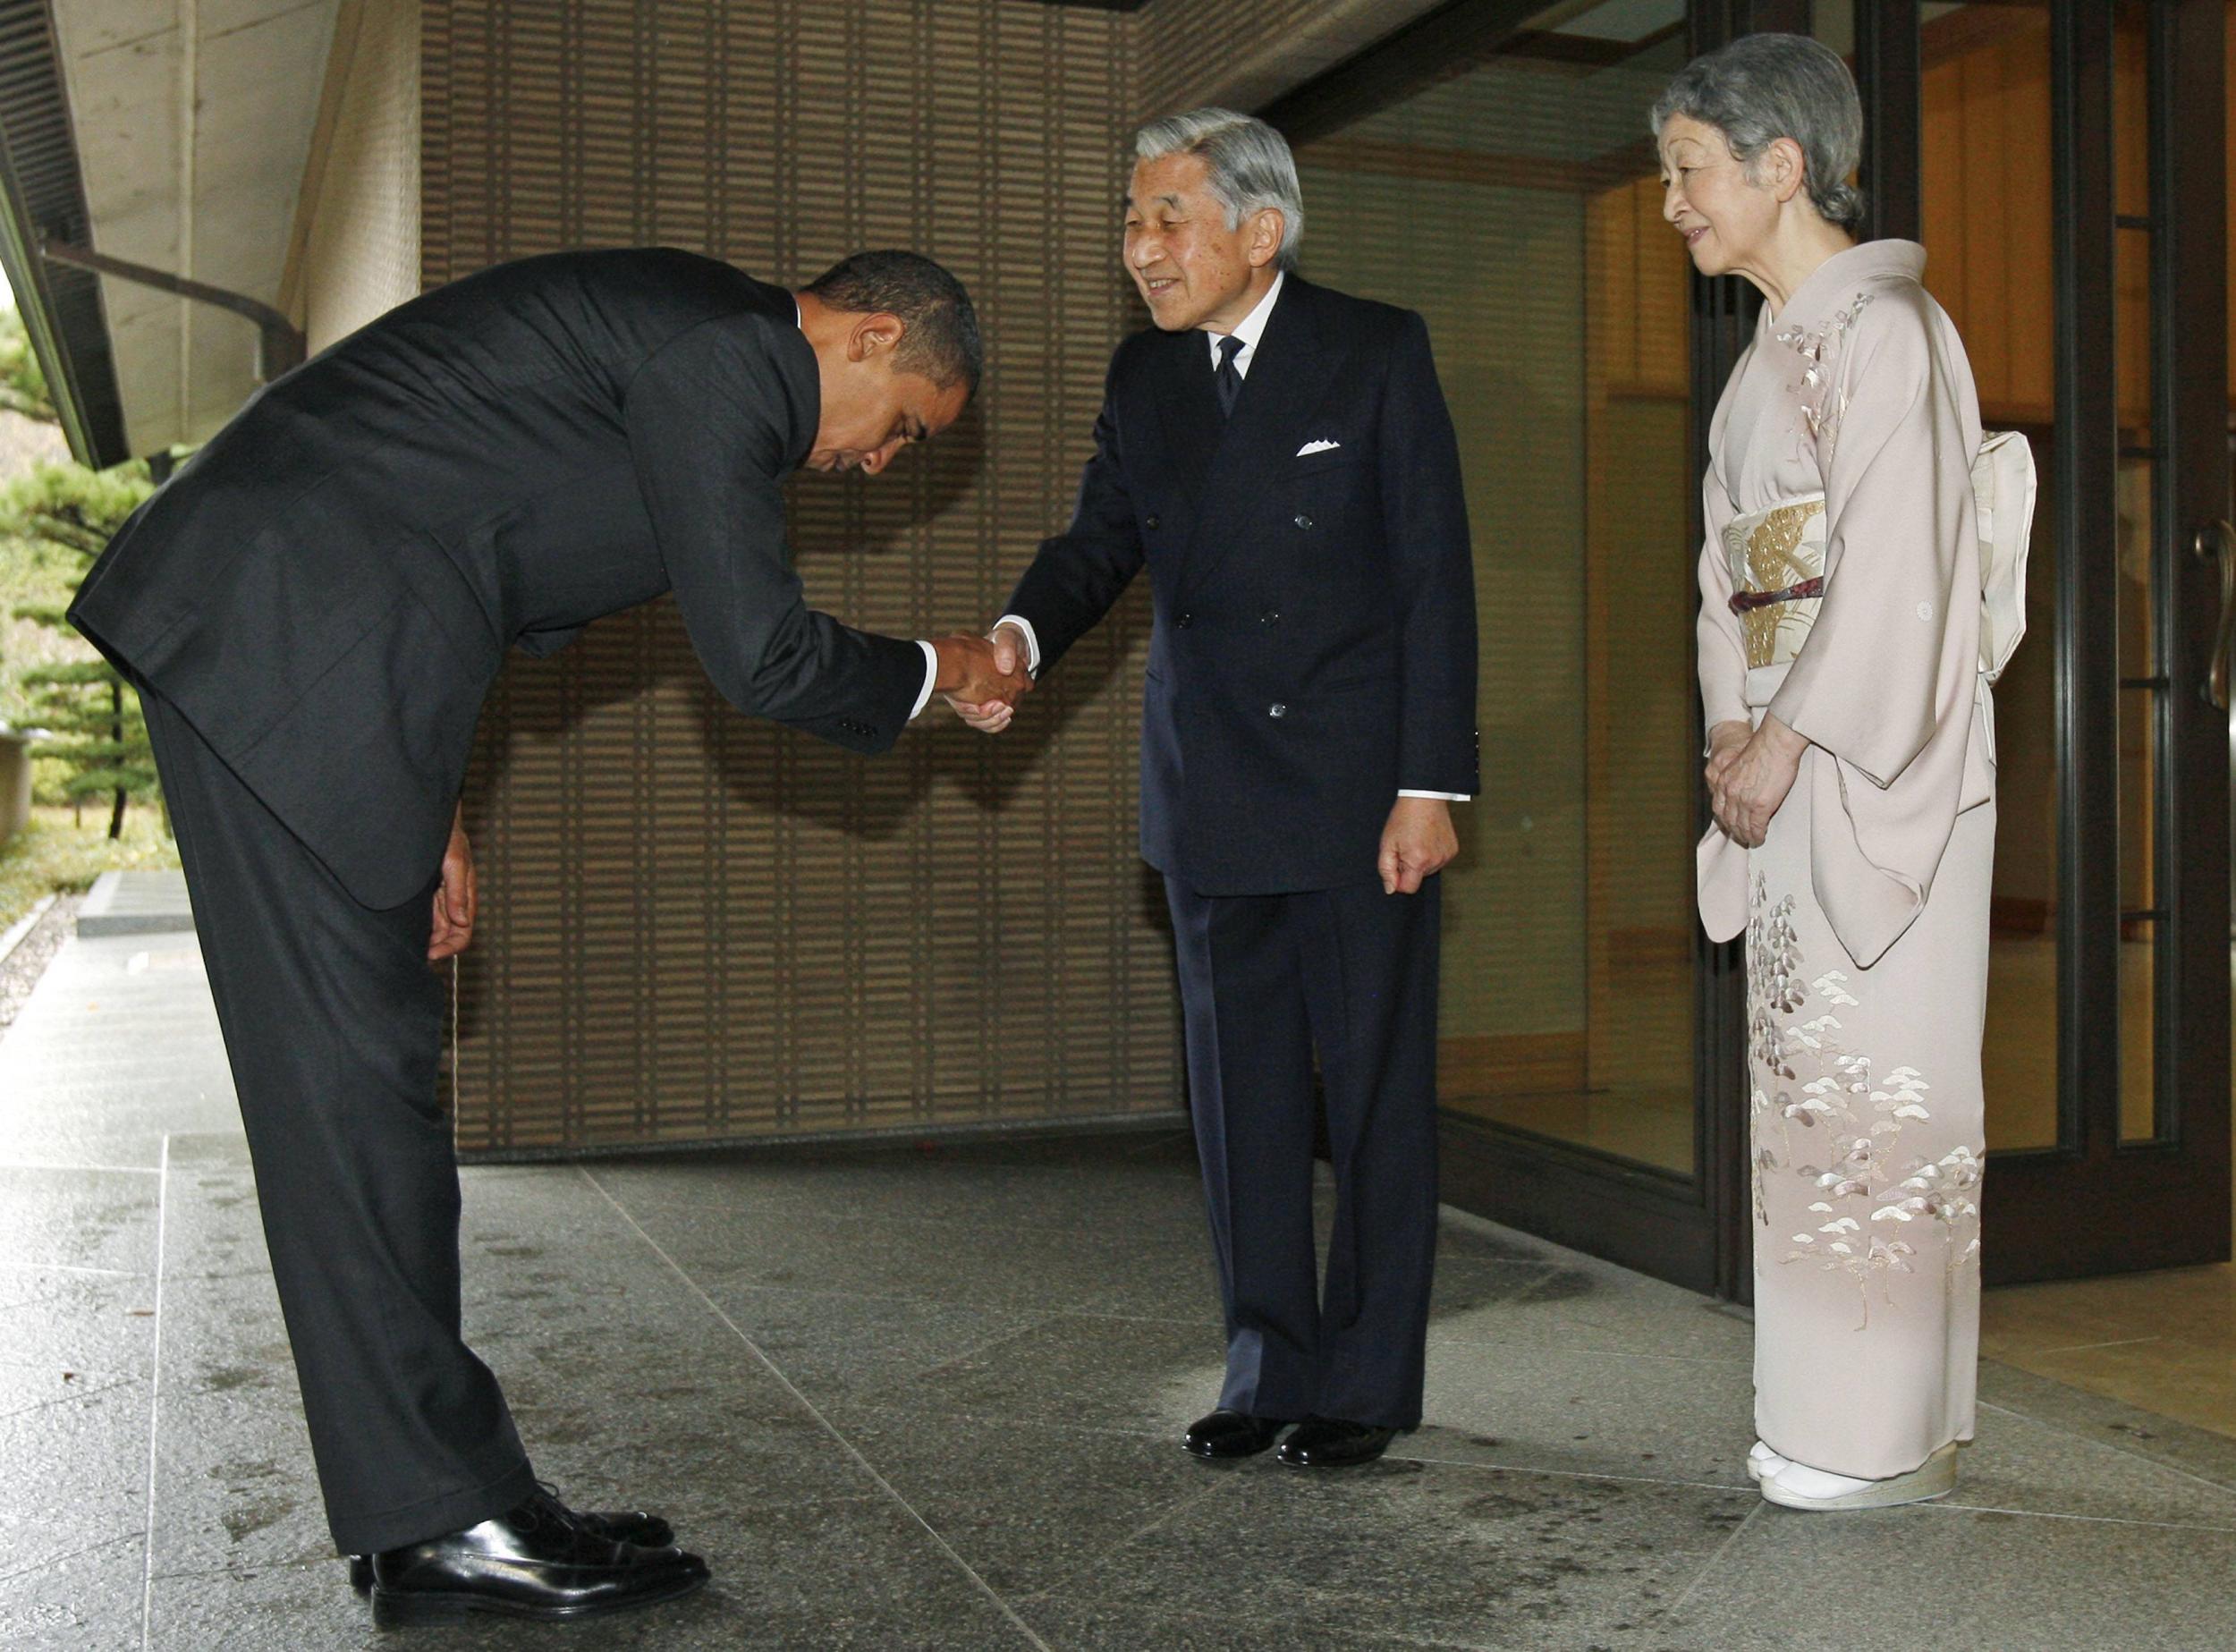 President Obama bends low as he is greeted by Emperor Akihito and his wife Michiko